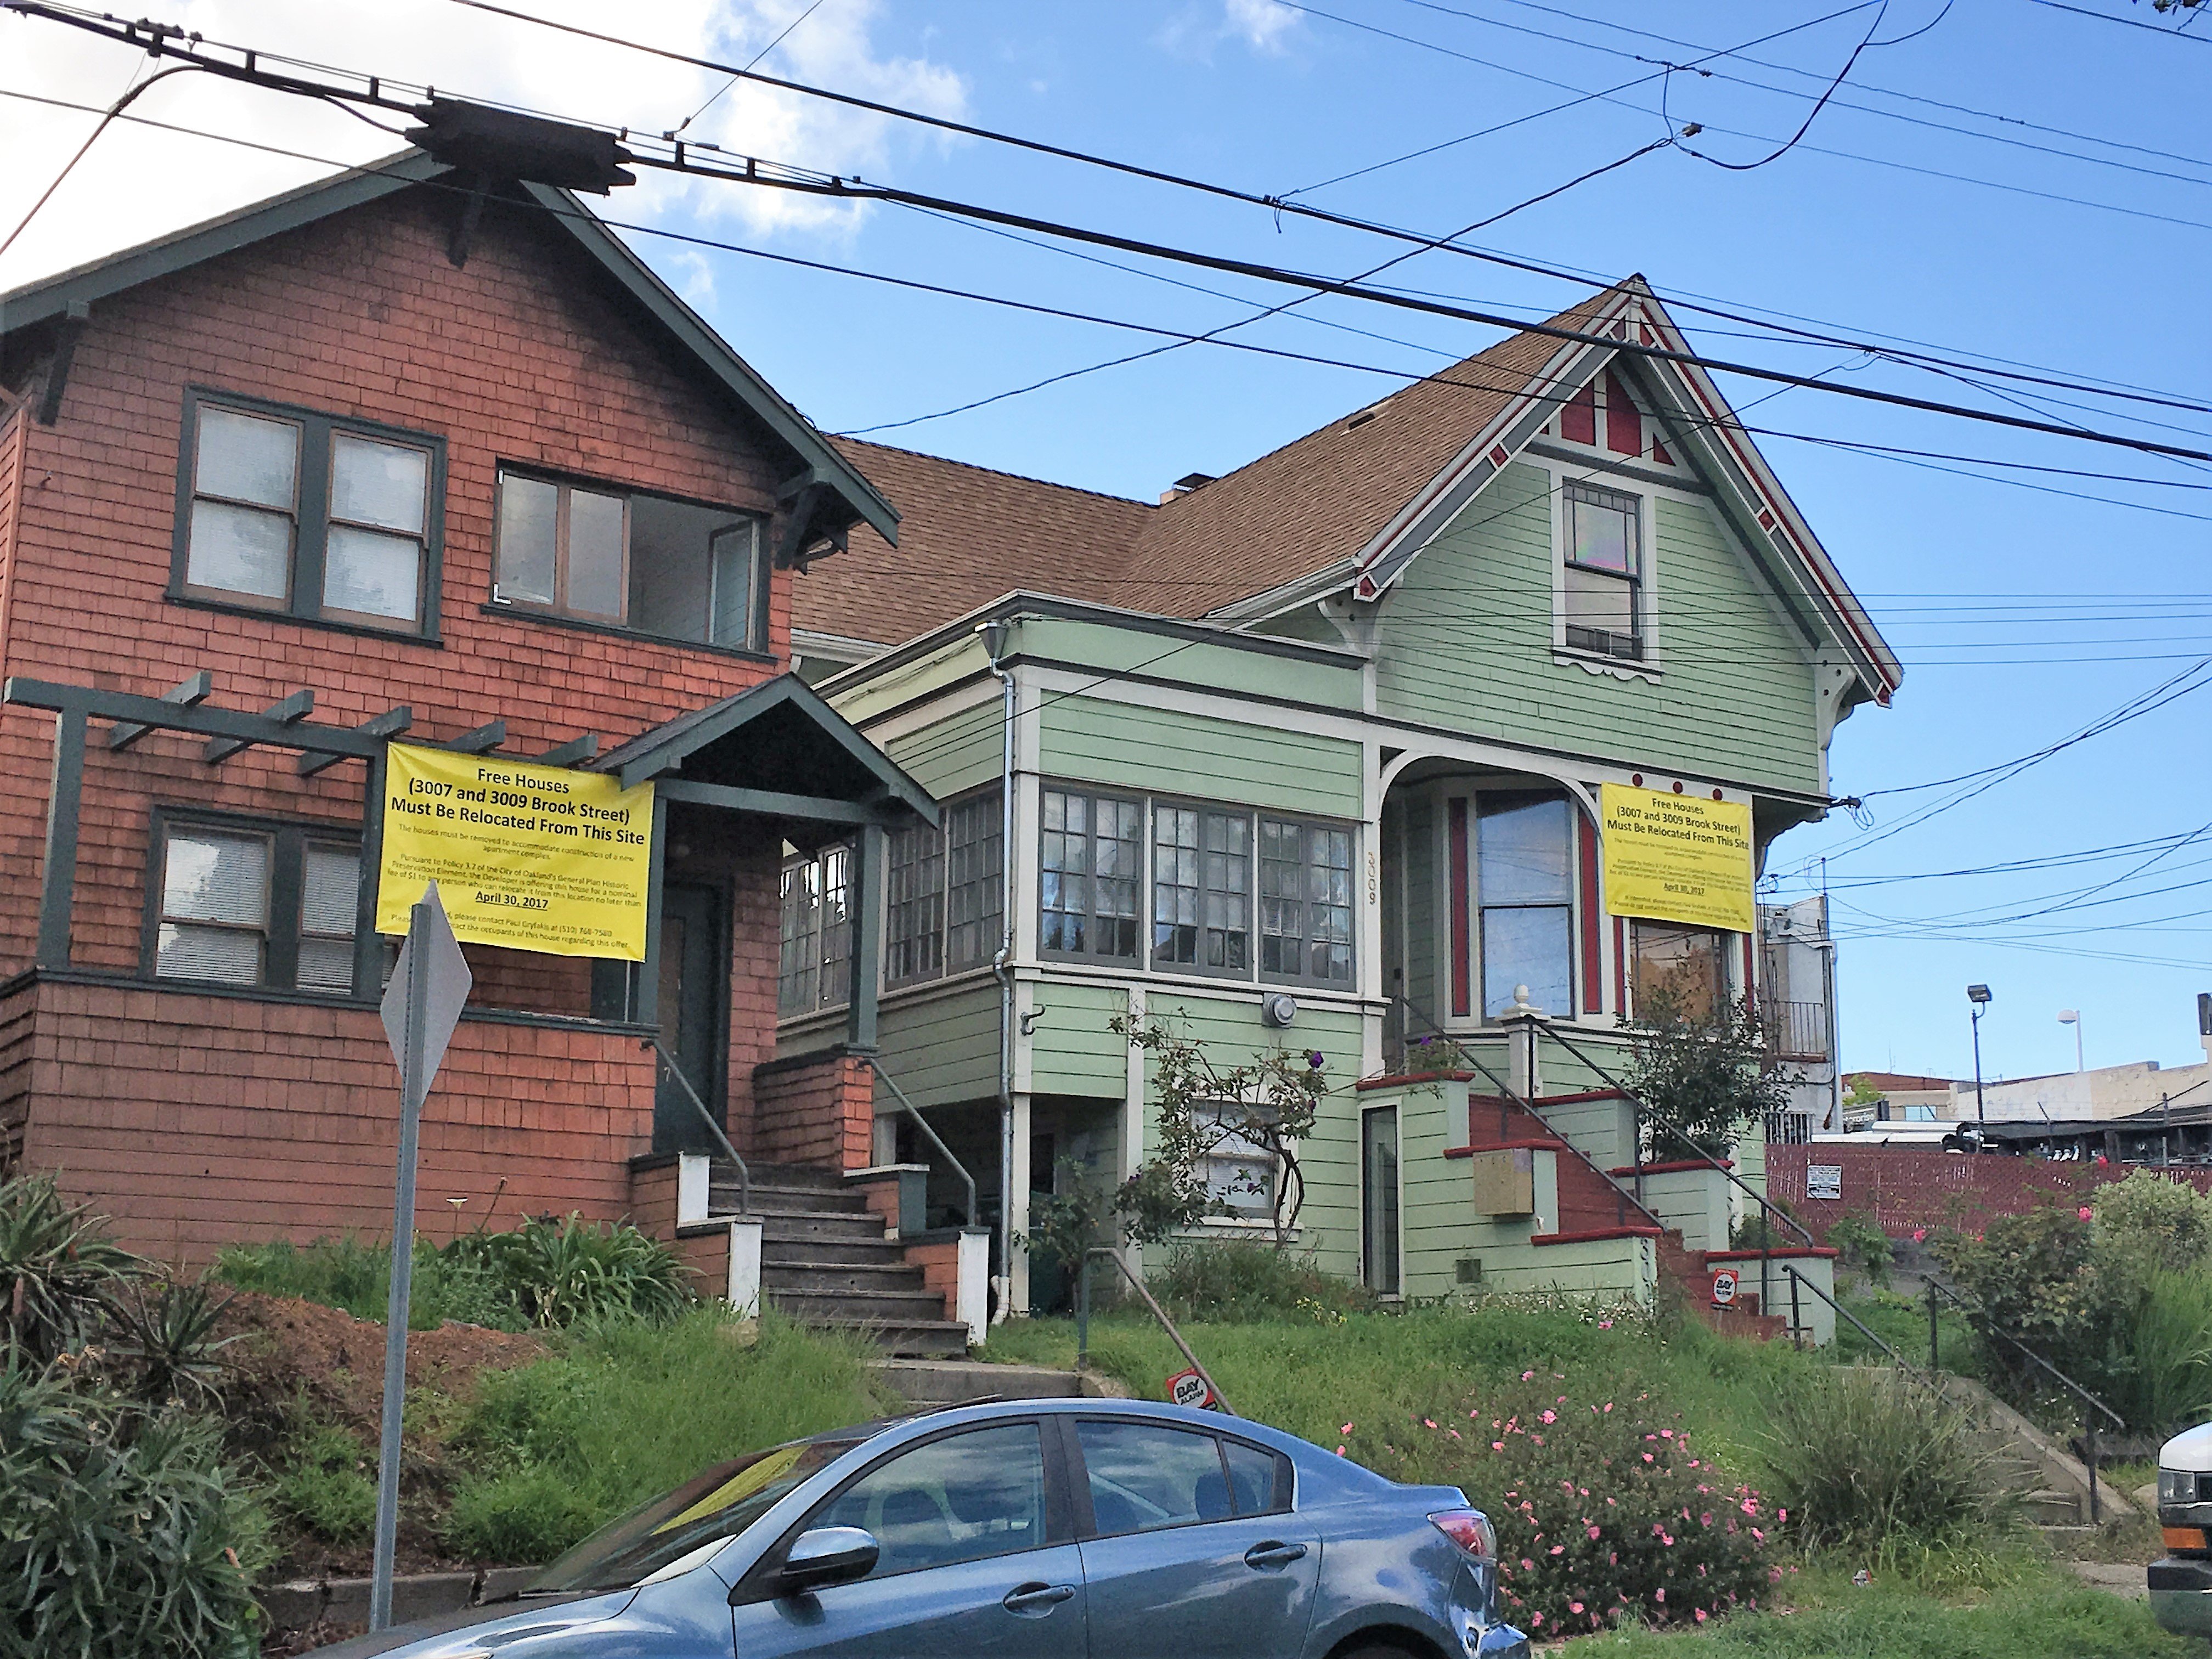 2 Oakland houses for sale for $1 to make way for development